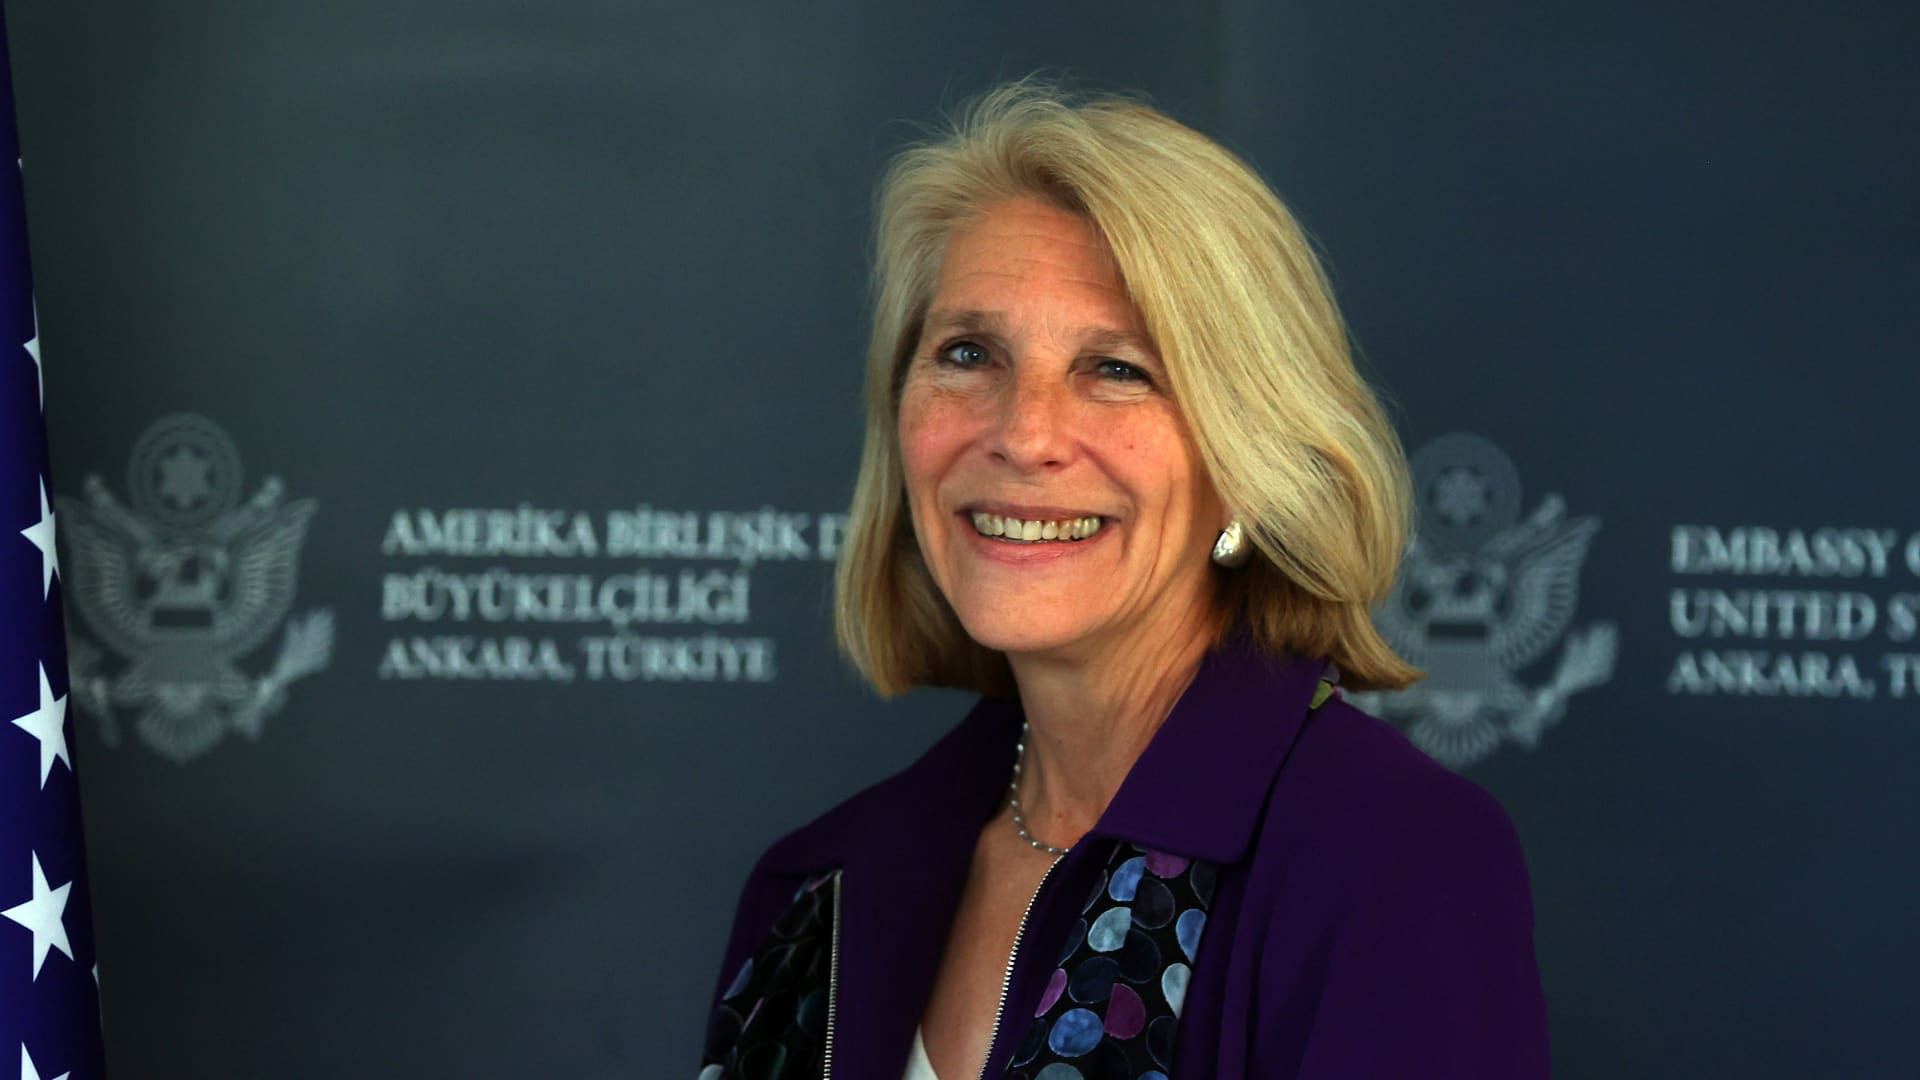 U.S. Assistant Secretary of State for European and Eurasian Affairs, Karen Donfried poses for a photo during an interview on her visit, including Ankara and Istanbul, and recent developments on bilateral relations in Ankara, Turkey on November 18, 2021. (Photo by Evrim Aydin/Anadolu Agency via Getty Images)